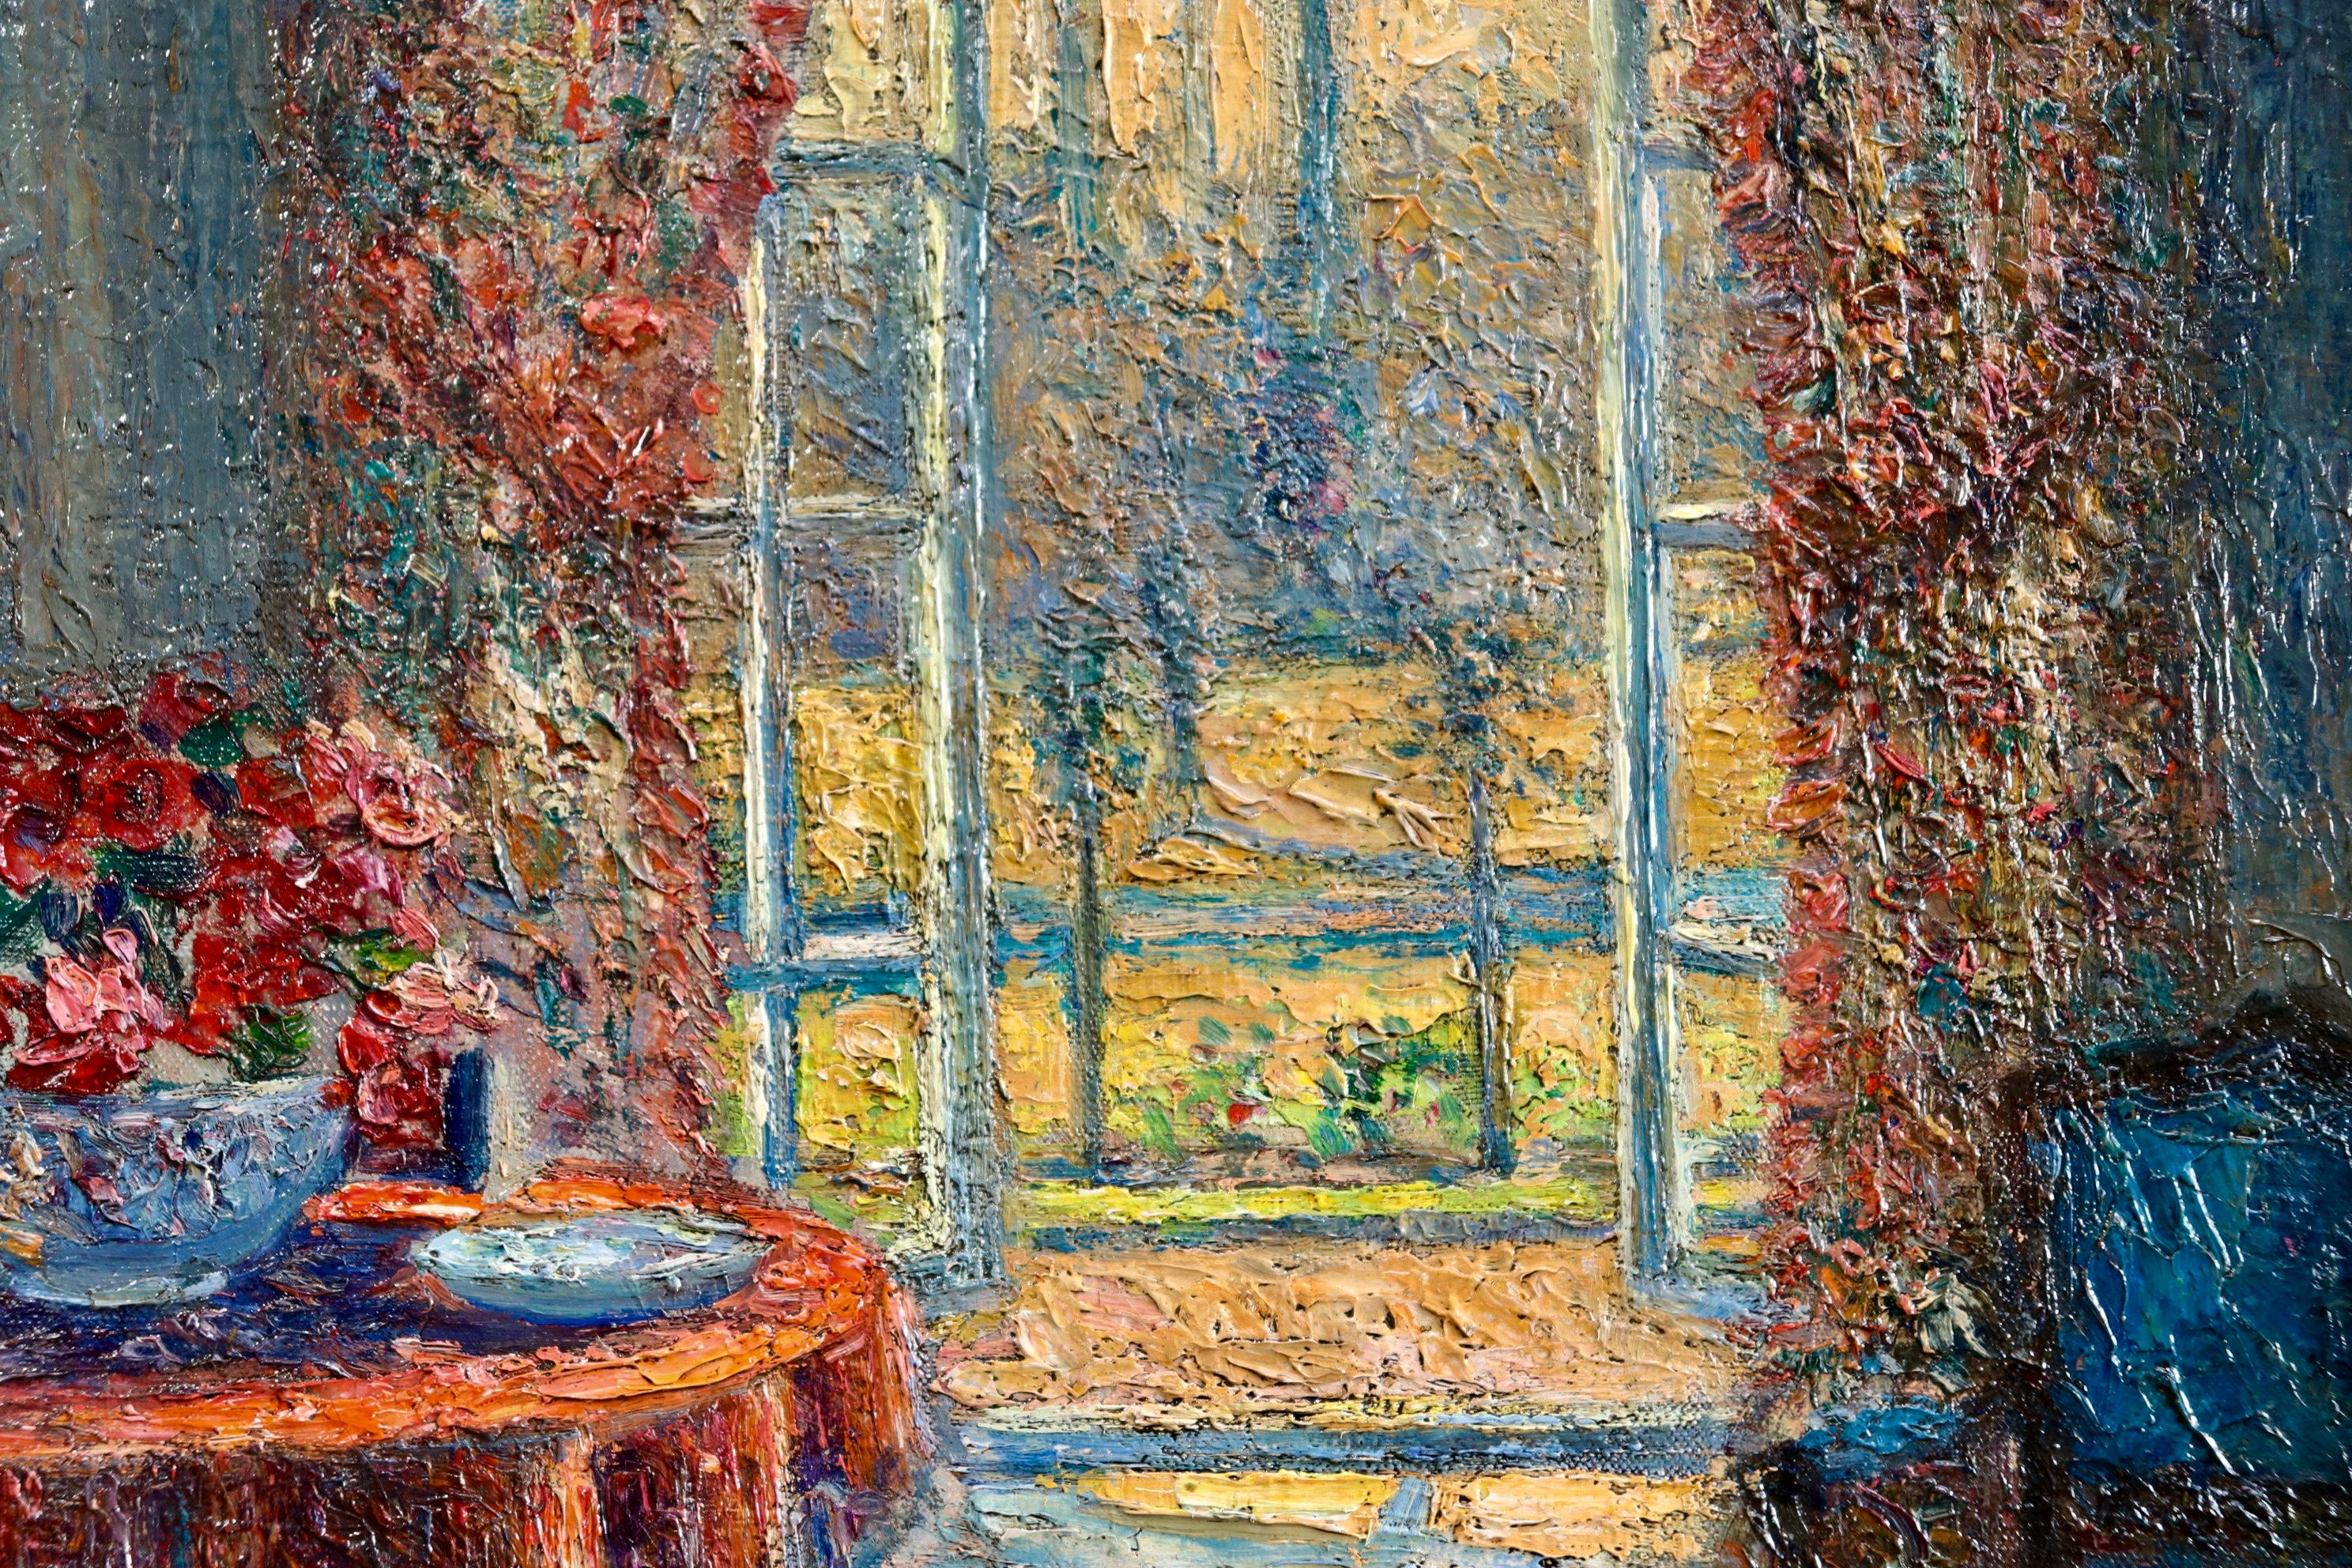 A wonderful oil on canvas circa 1900 by French painter Leo Gausson depicting a view of the inside of the artist's house and a view of the gardens beyond from the open windows. Signed lower right. Framed dimensions are 26 inches high by 22 inches